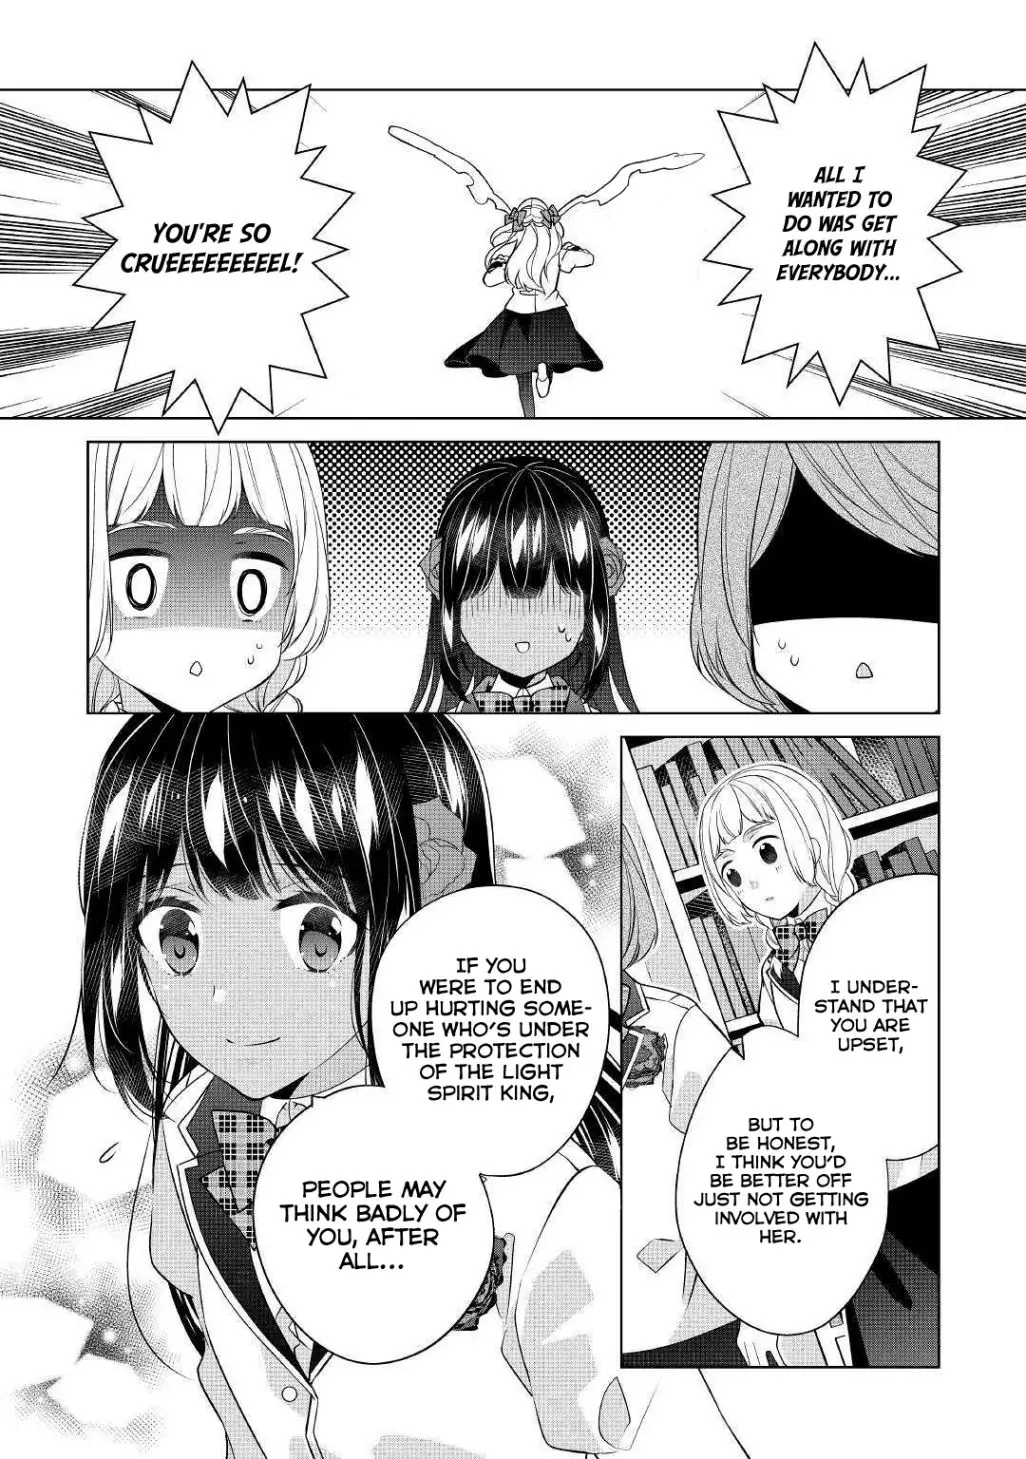 I'm Not a Villainess!! Just Because I Can Control Darkness Doesn’t Mean I’m a Bad Person! - 7 page 11